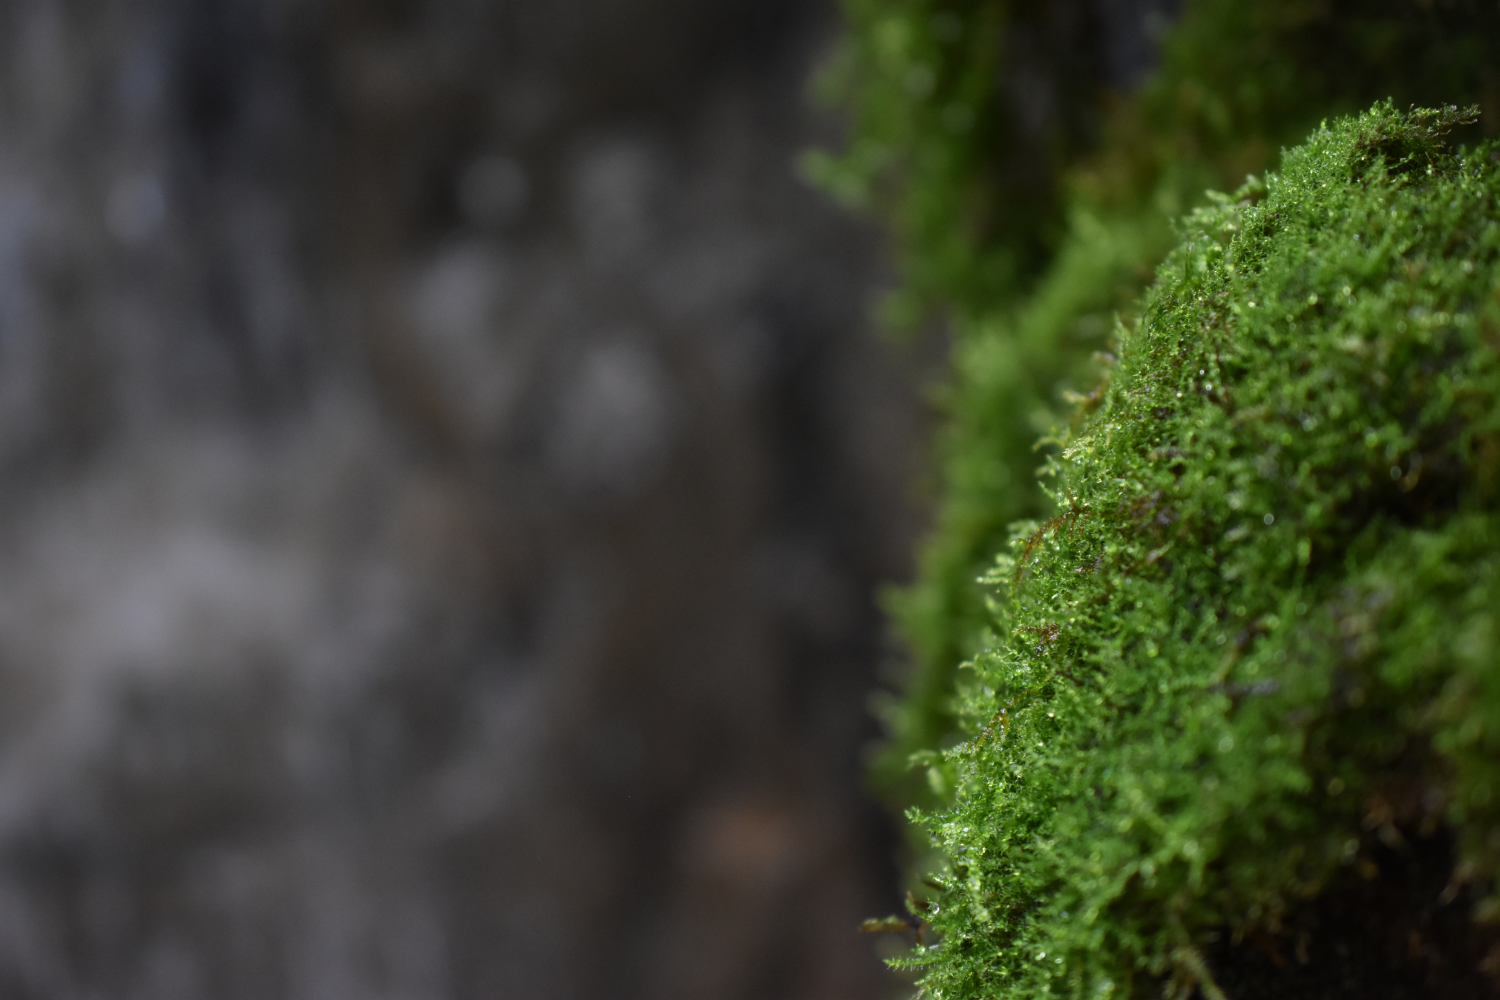 Upclose picture of moss